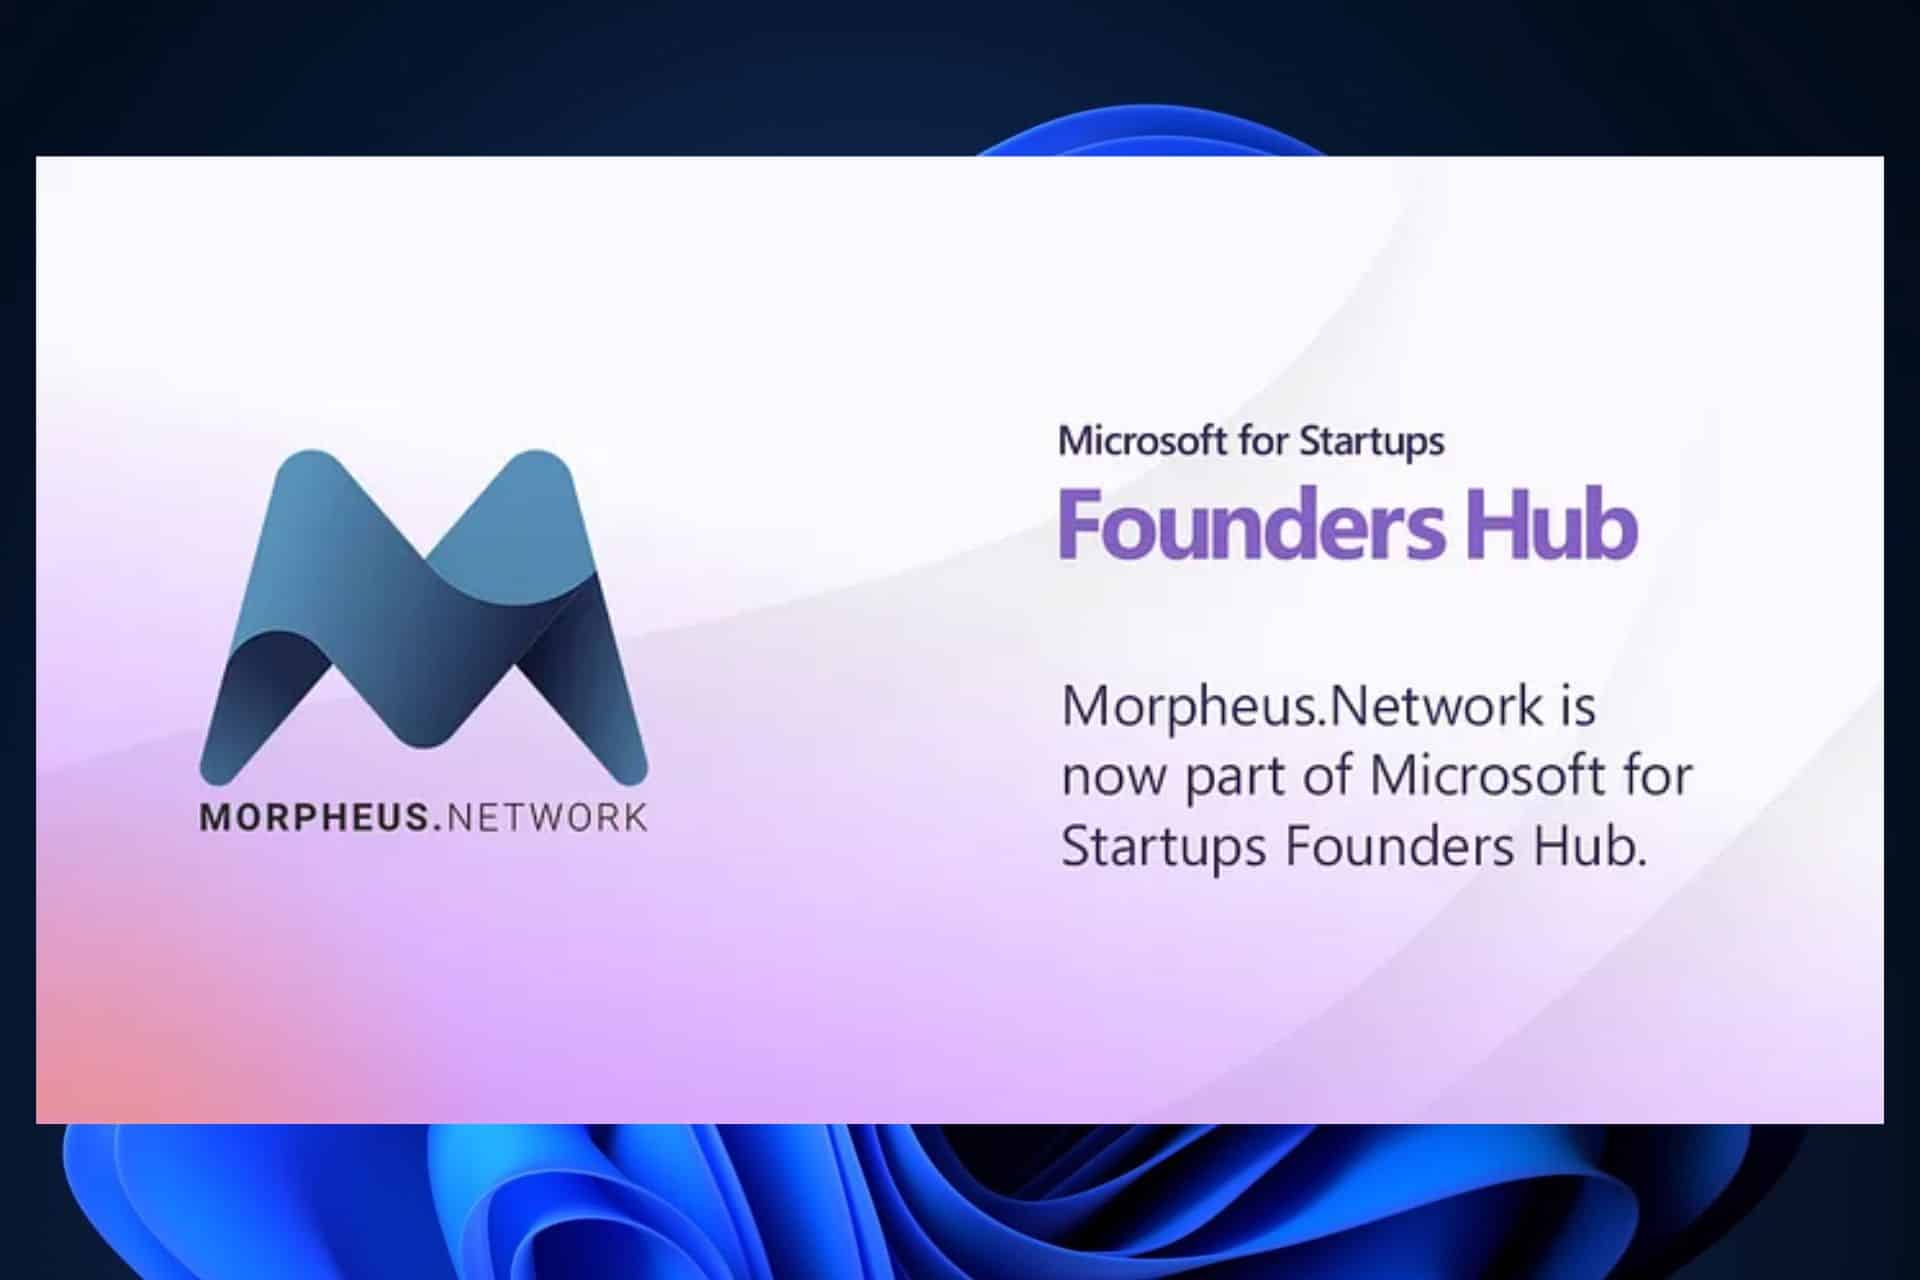 Supply chain management is about to get more sustainable in the future, now that Morpheus network is joining Microsoft